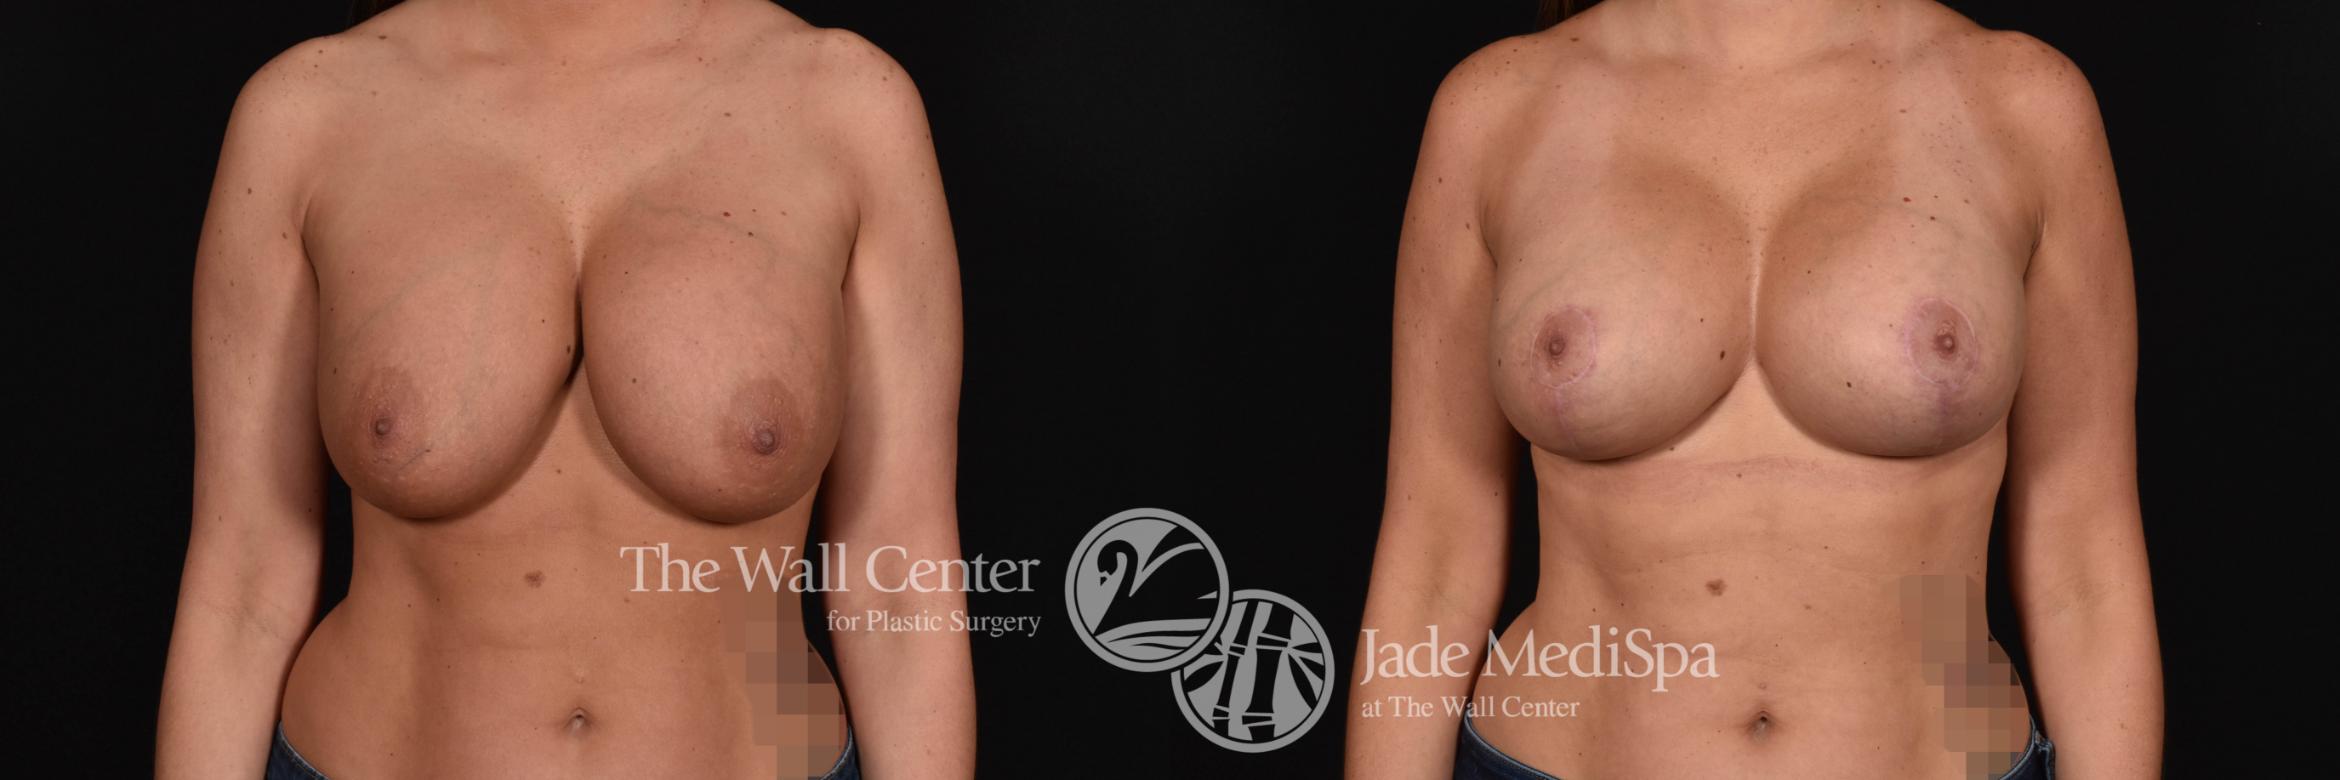 Breast Implant Exchange Front Photo, Shreveport, Louisiana, The Wall Center for Plastic Surgery, Case 884